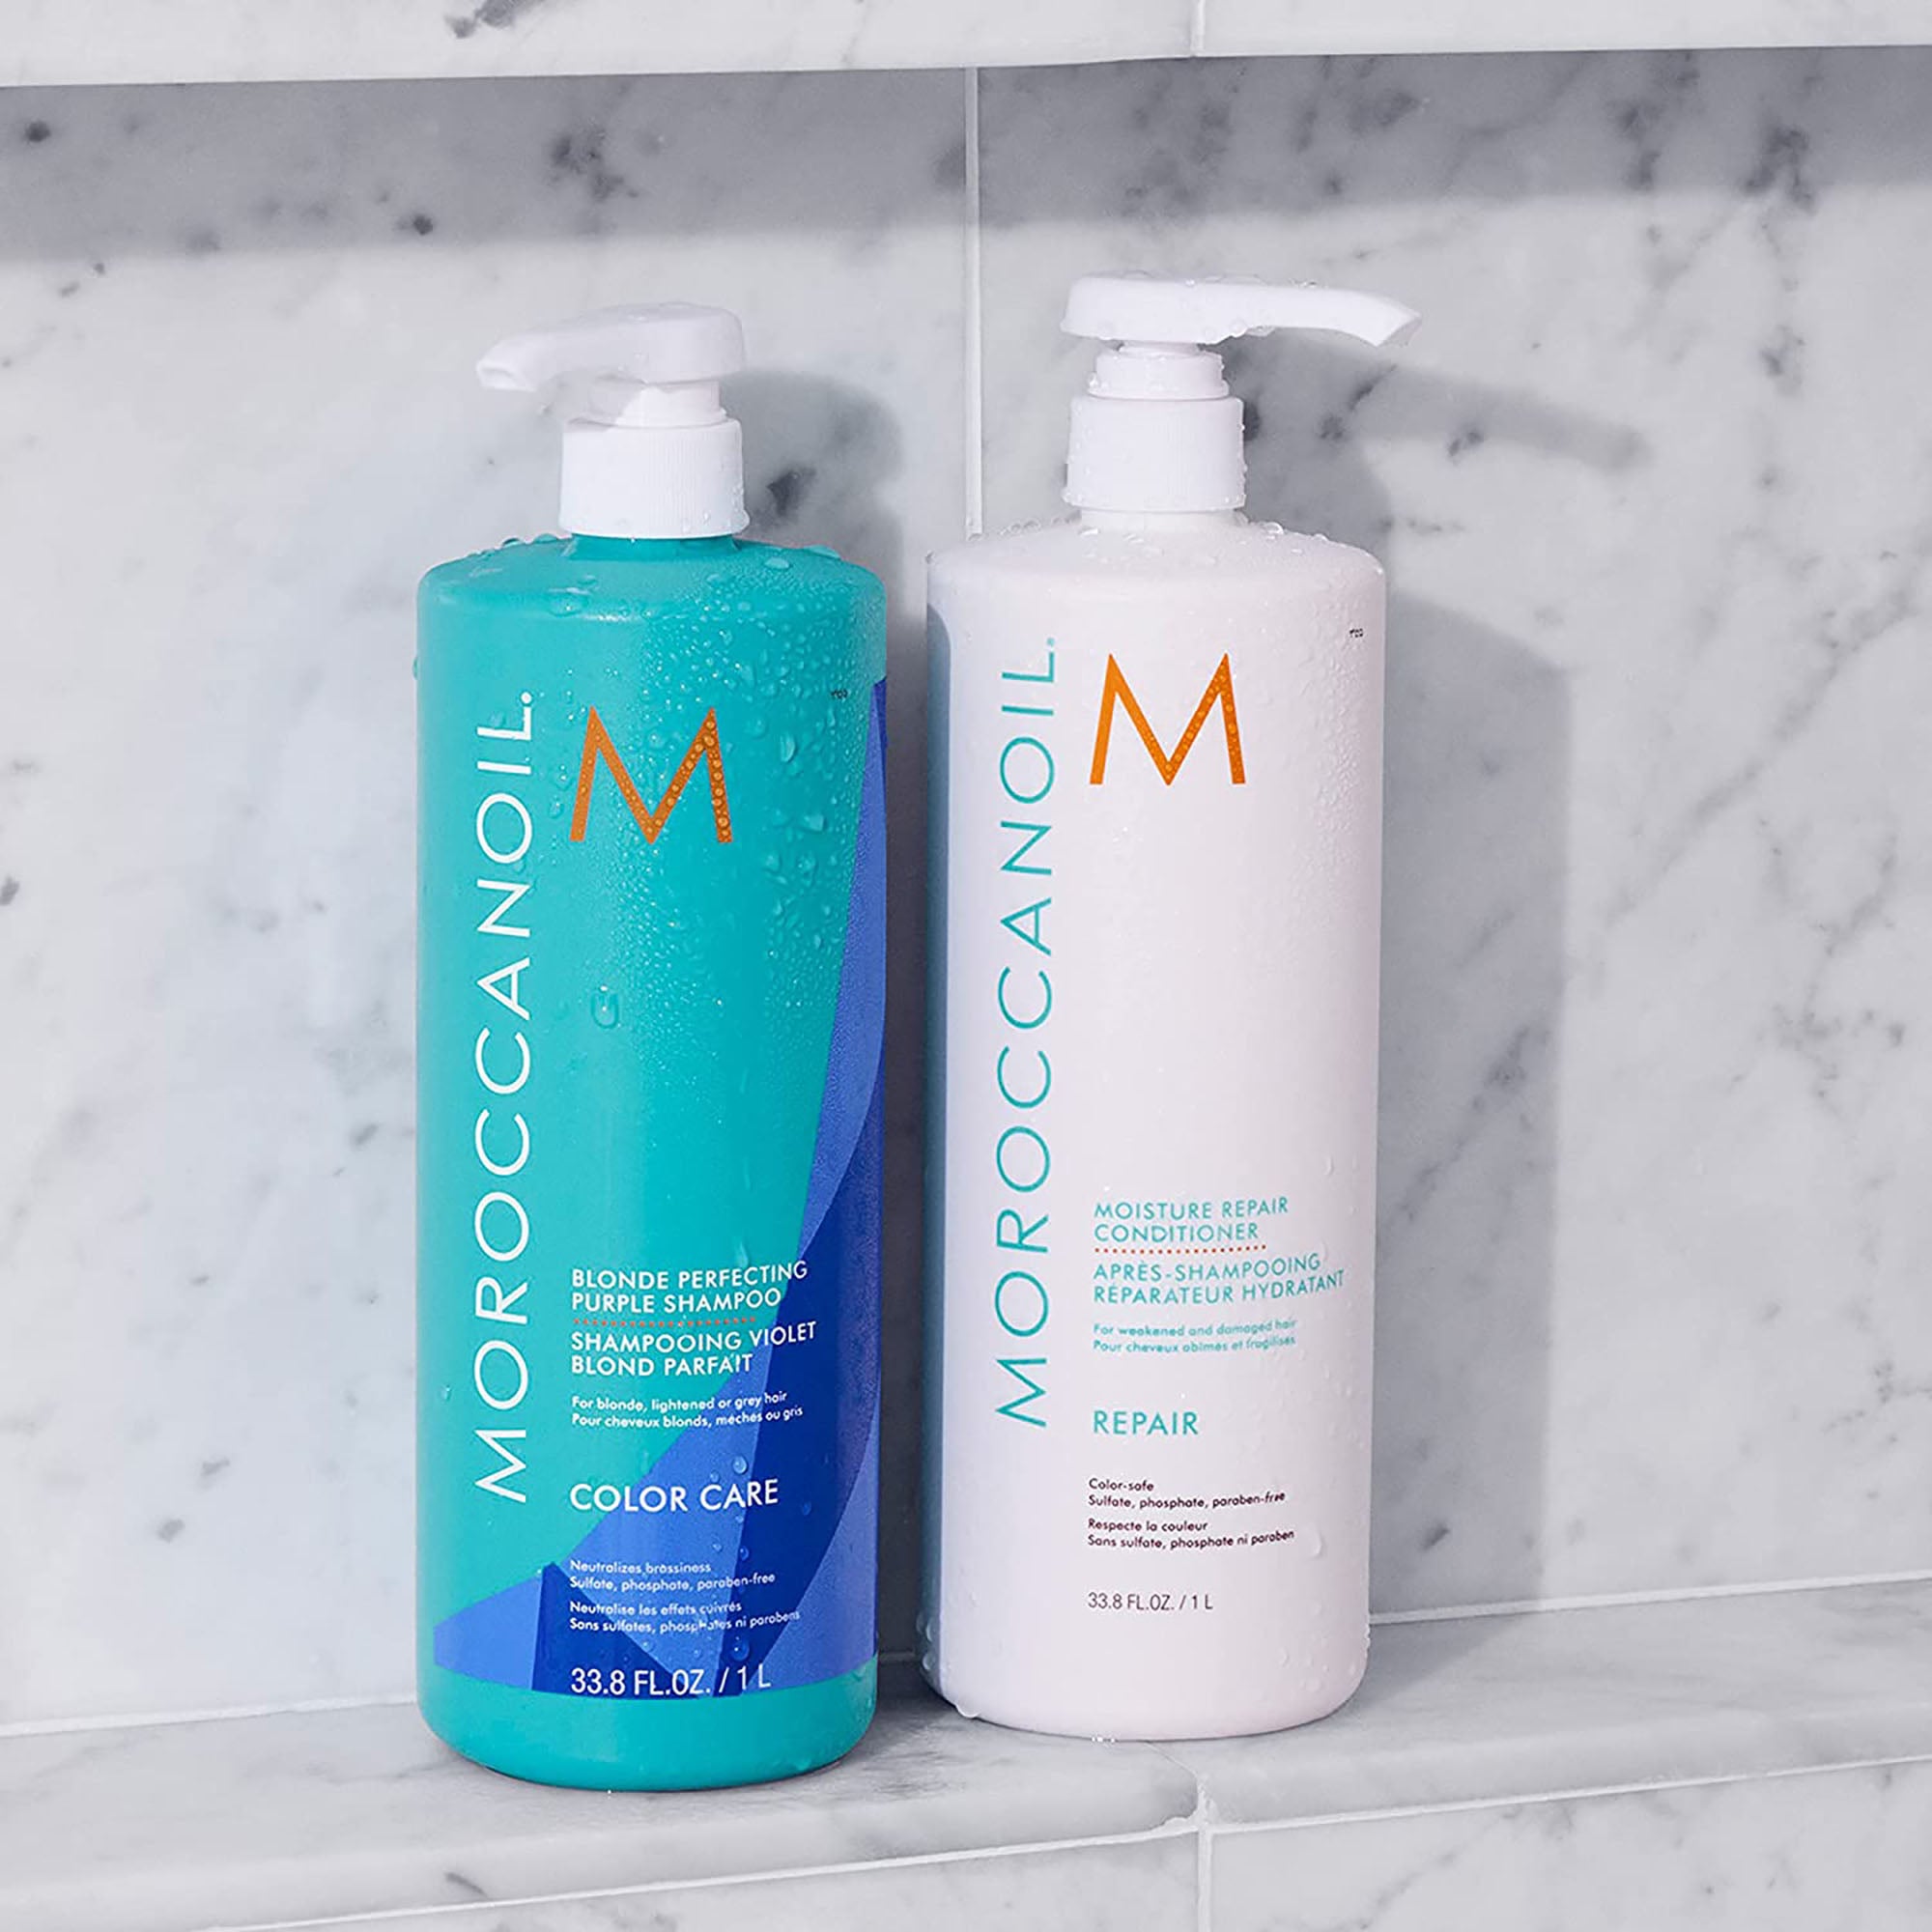 massefylde give Allergi MoroccanOil Blonde Perfecting Shampoo and Conditioner - Planet Beauty